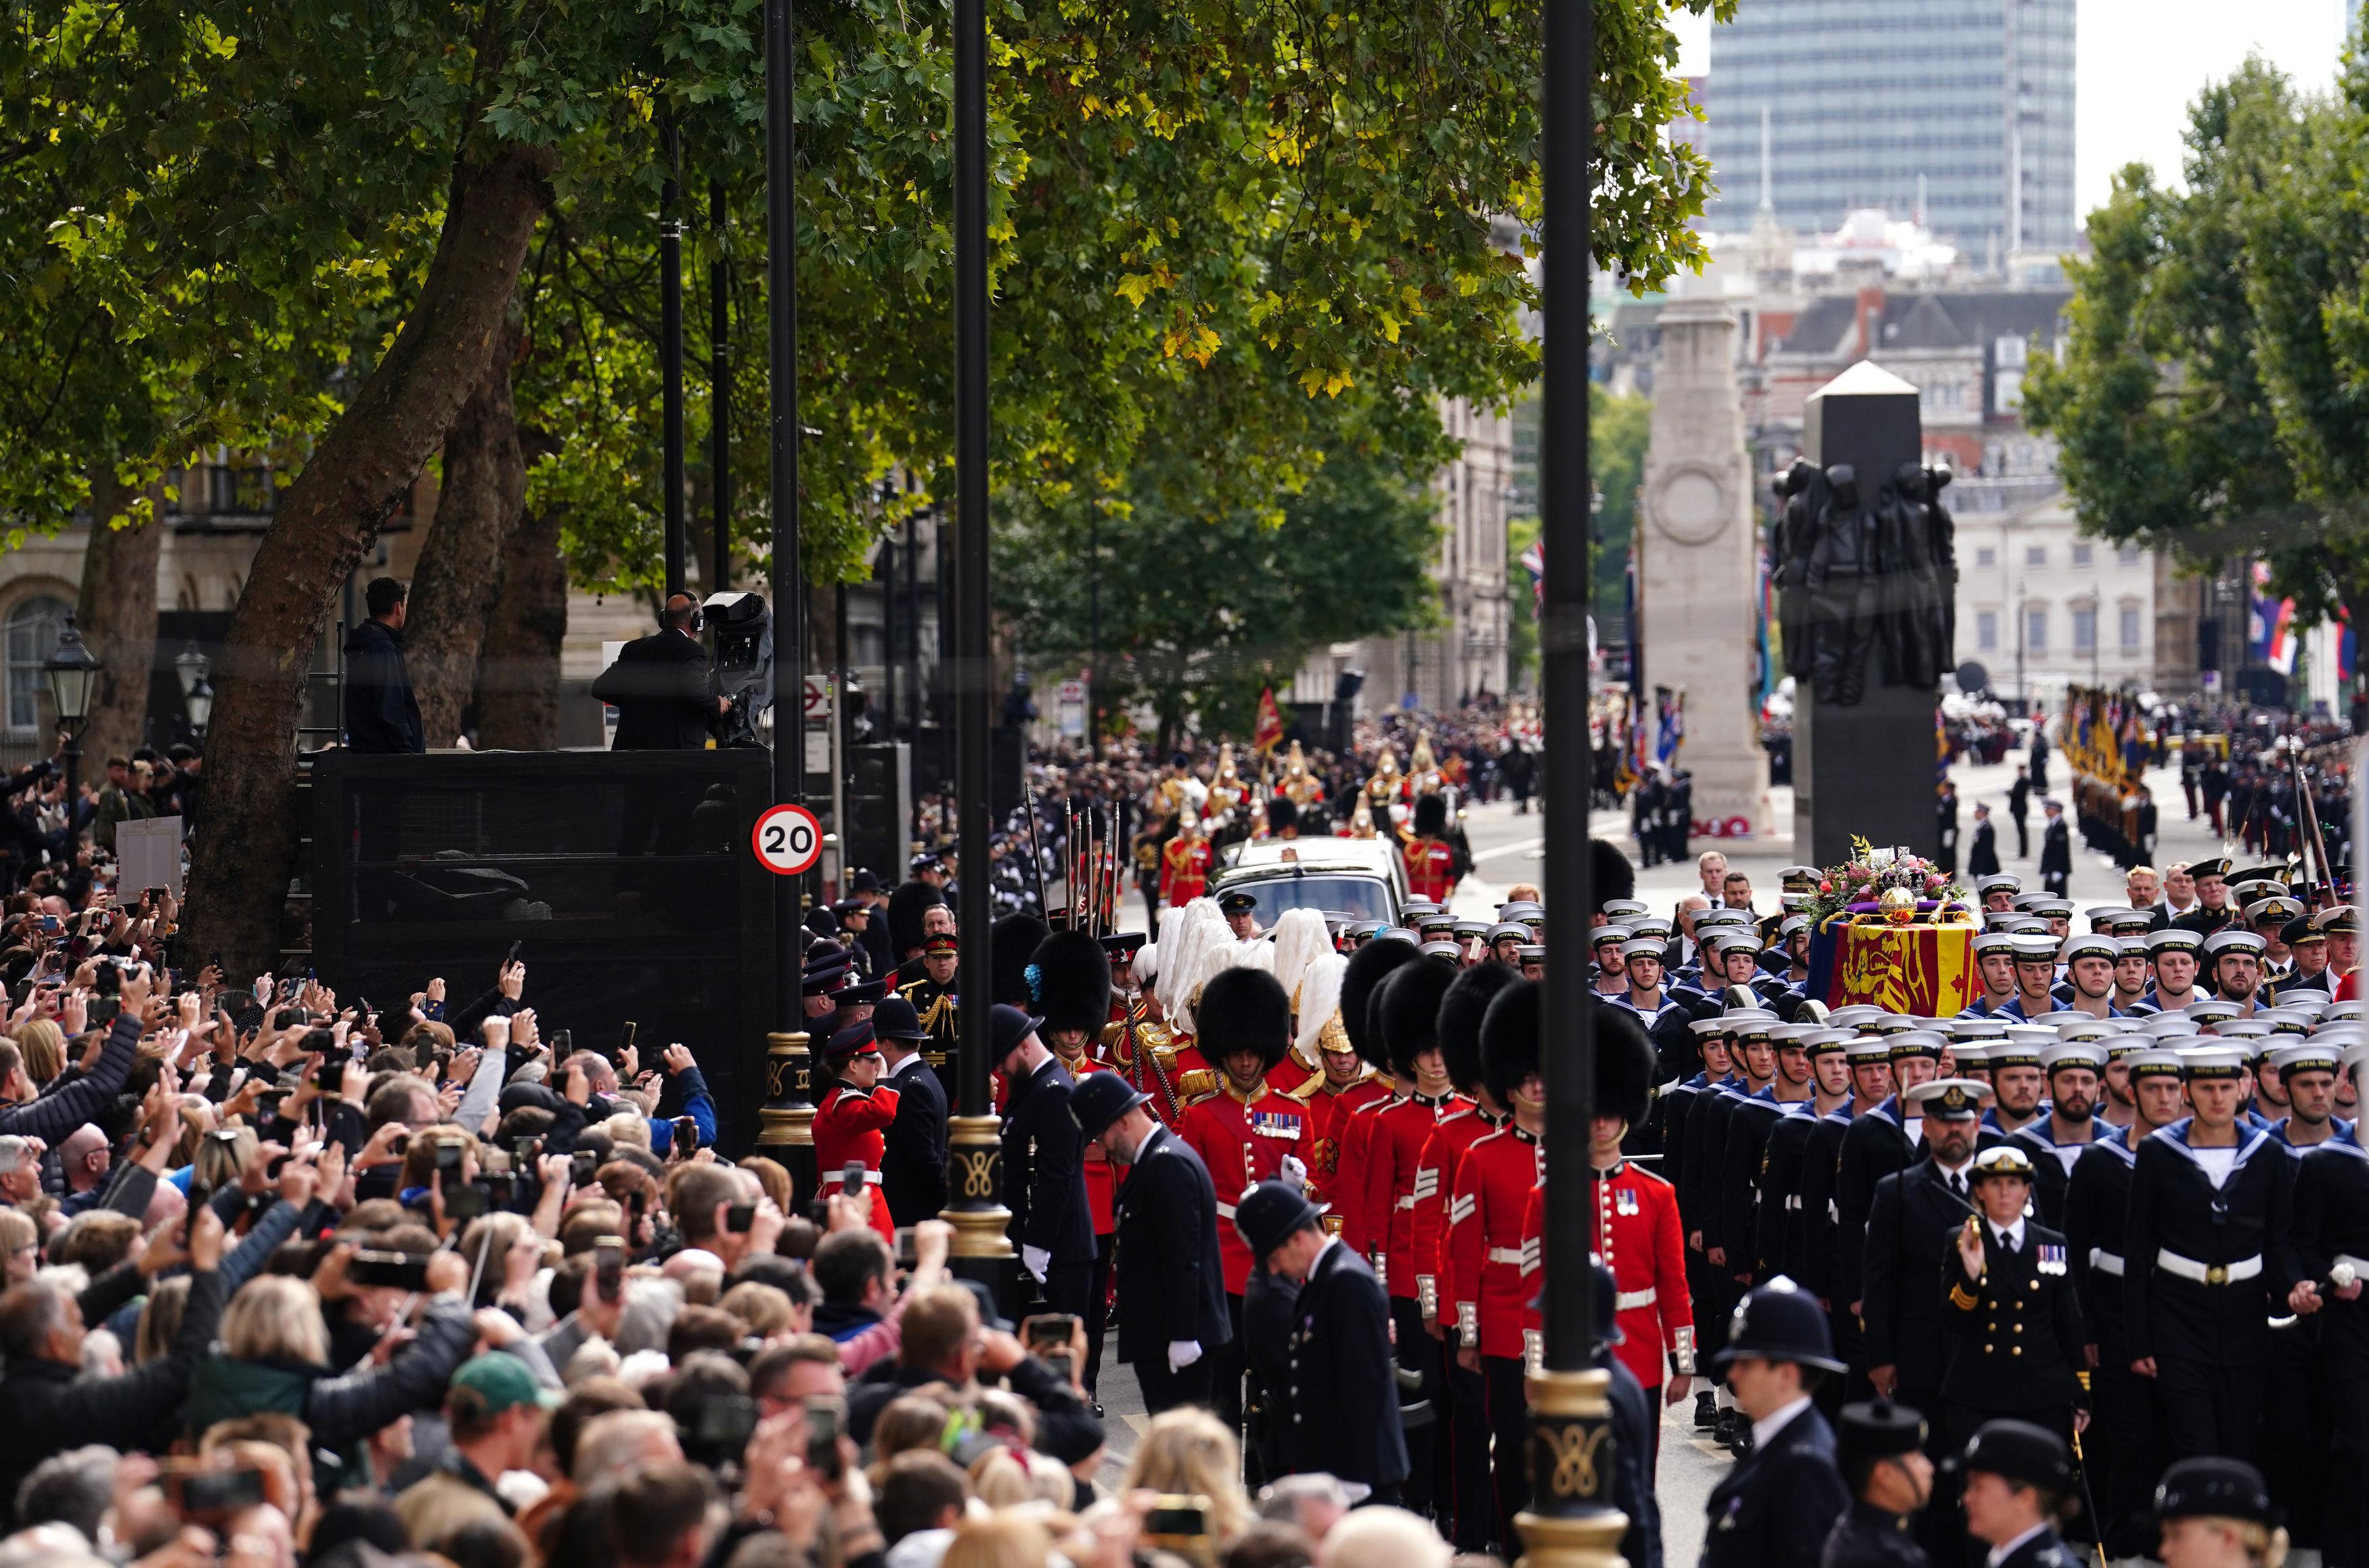 LONDON, ENGLAND - SEPTEMBER 19: Crowds watch as the State Gun Carriage carries the coffin of Queen Elizabeth II, draped in the Royal Standard with the Imperial State Crown and the Sovereign's orb and sceptre, in the Ceremonial Procession following her State Funeral at Westminster Abbey on September 19, 2022 in London, England.  Elizabeth Alexandra Mary Windsor was born in Bruton Street, Mayfair, London on 21 April 1926. She married Prince Philip in 1947 and ascended the throne of the United Kingdom and Commonwealth on 6 February 1952 after the death of her Father, King George VI. Queen Elizabeth II died at Balmoral Castle in Scotland on September 8, 2022, and is succeeded by her eldest son, King Charles III. (Photo by David Davies - WPA Pool/Getty Images)